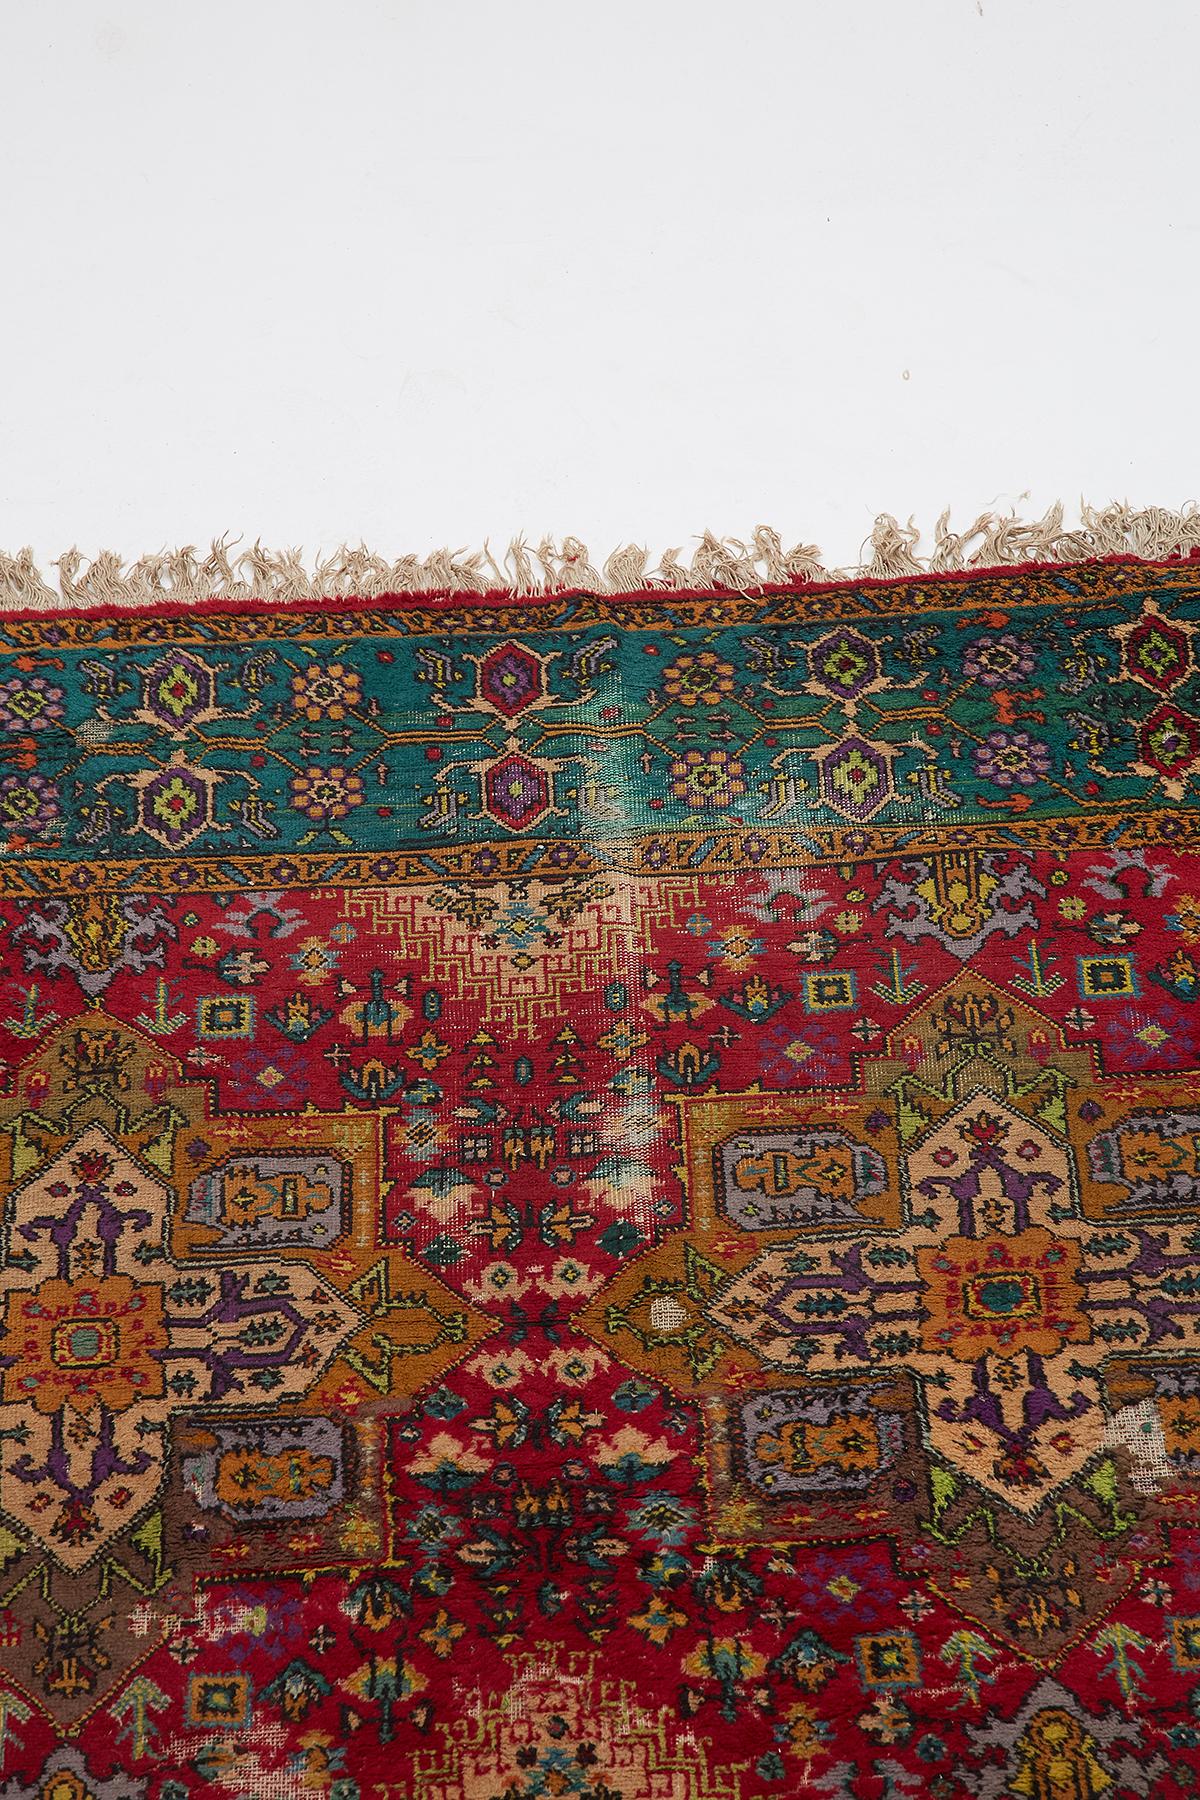 Hand-Crafted Colorful Tribal Style Turkish Rug